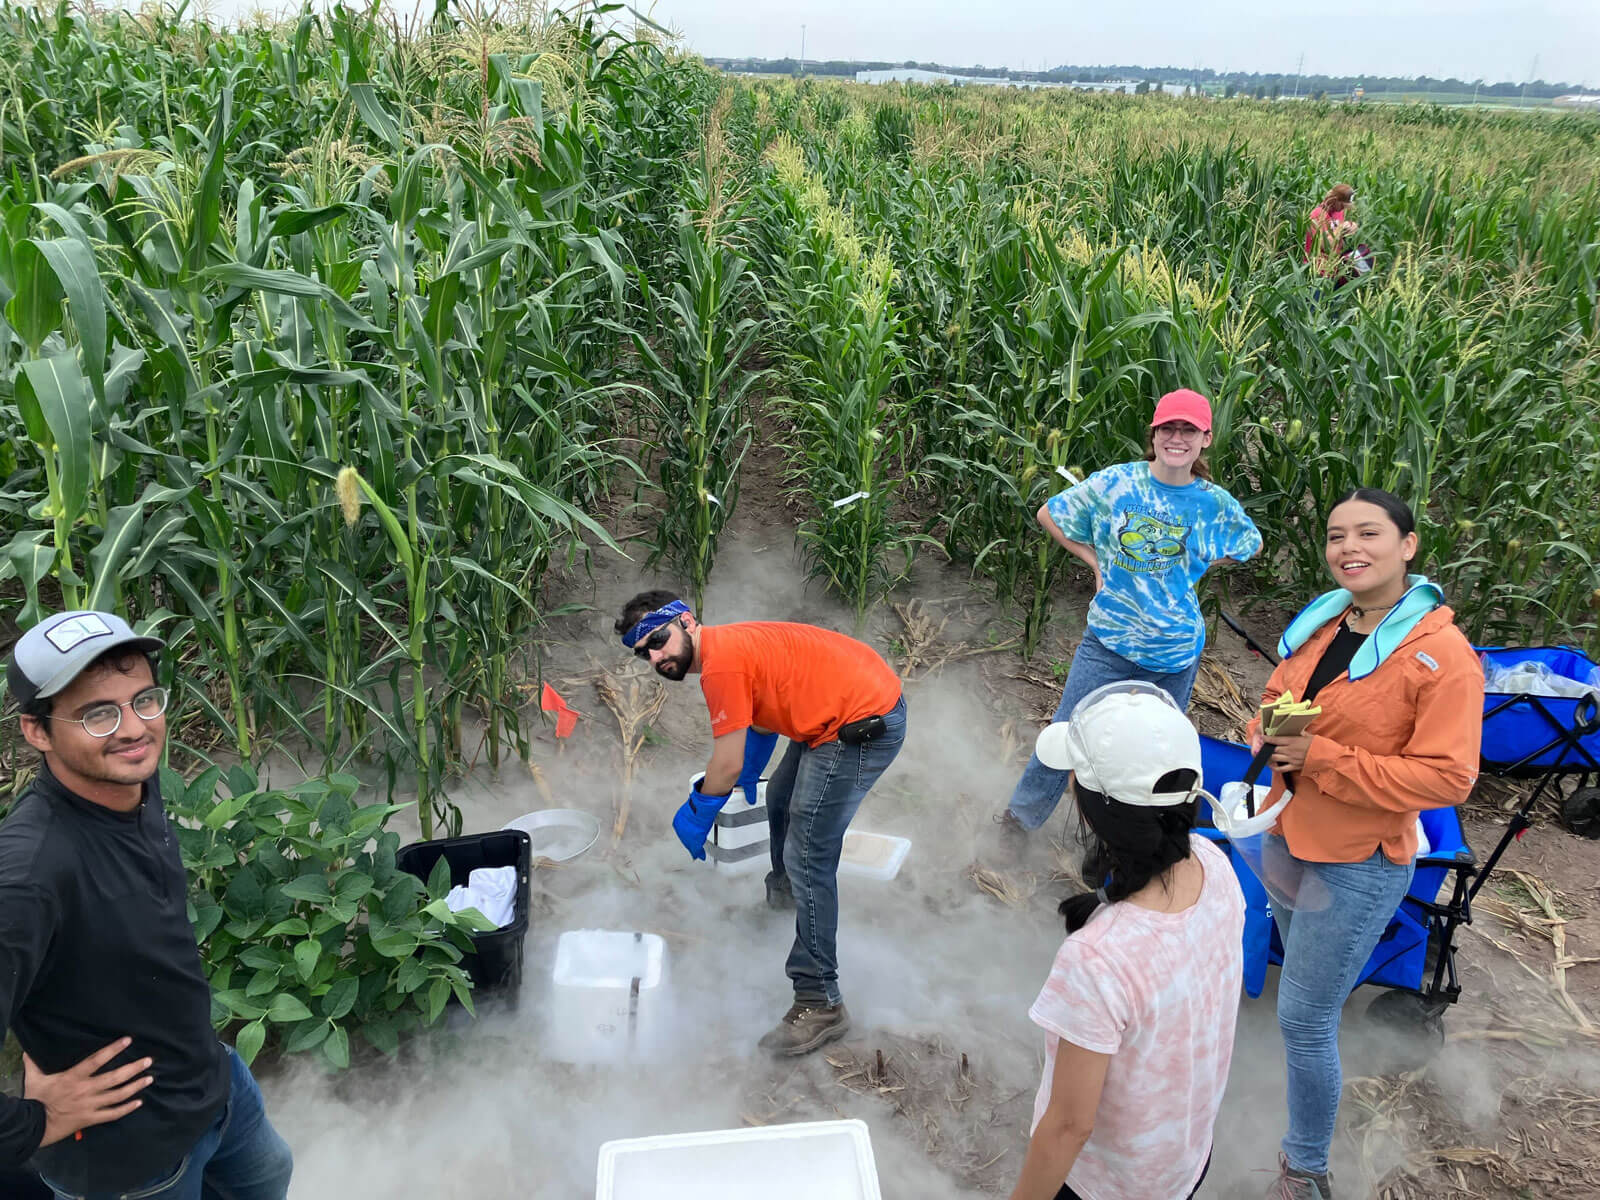 James Schnable's Lab posed for a picture while collecting data from their fields!